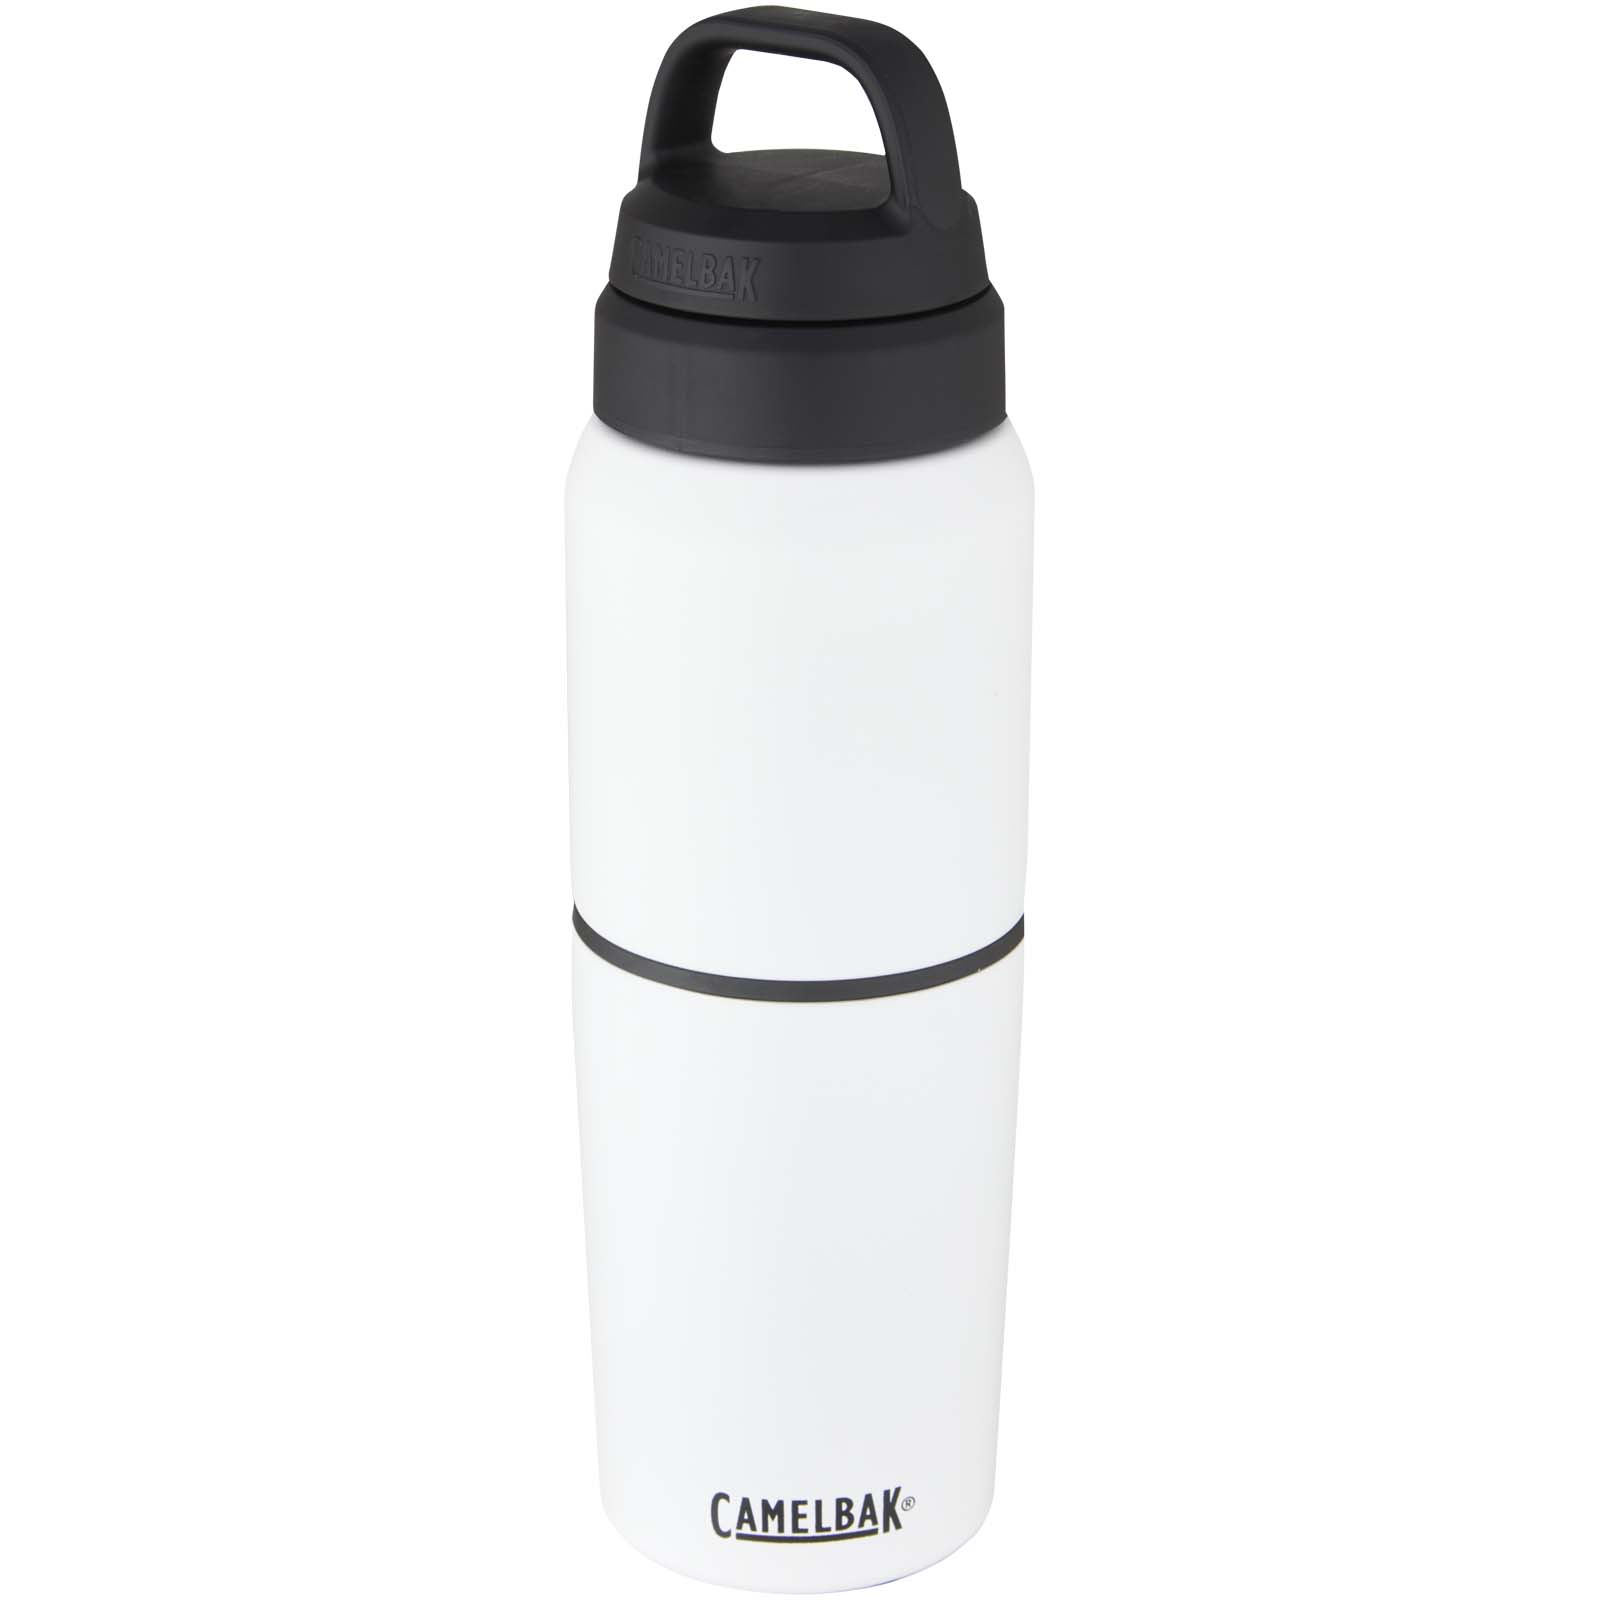 Drinkware - CamelBak® MultiBev vacuum insulated stainless steel 500 ml bottle and 350 ml cup